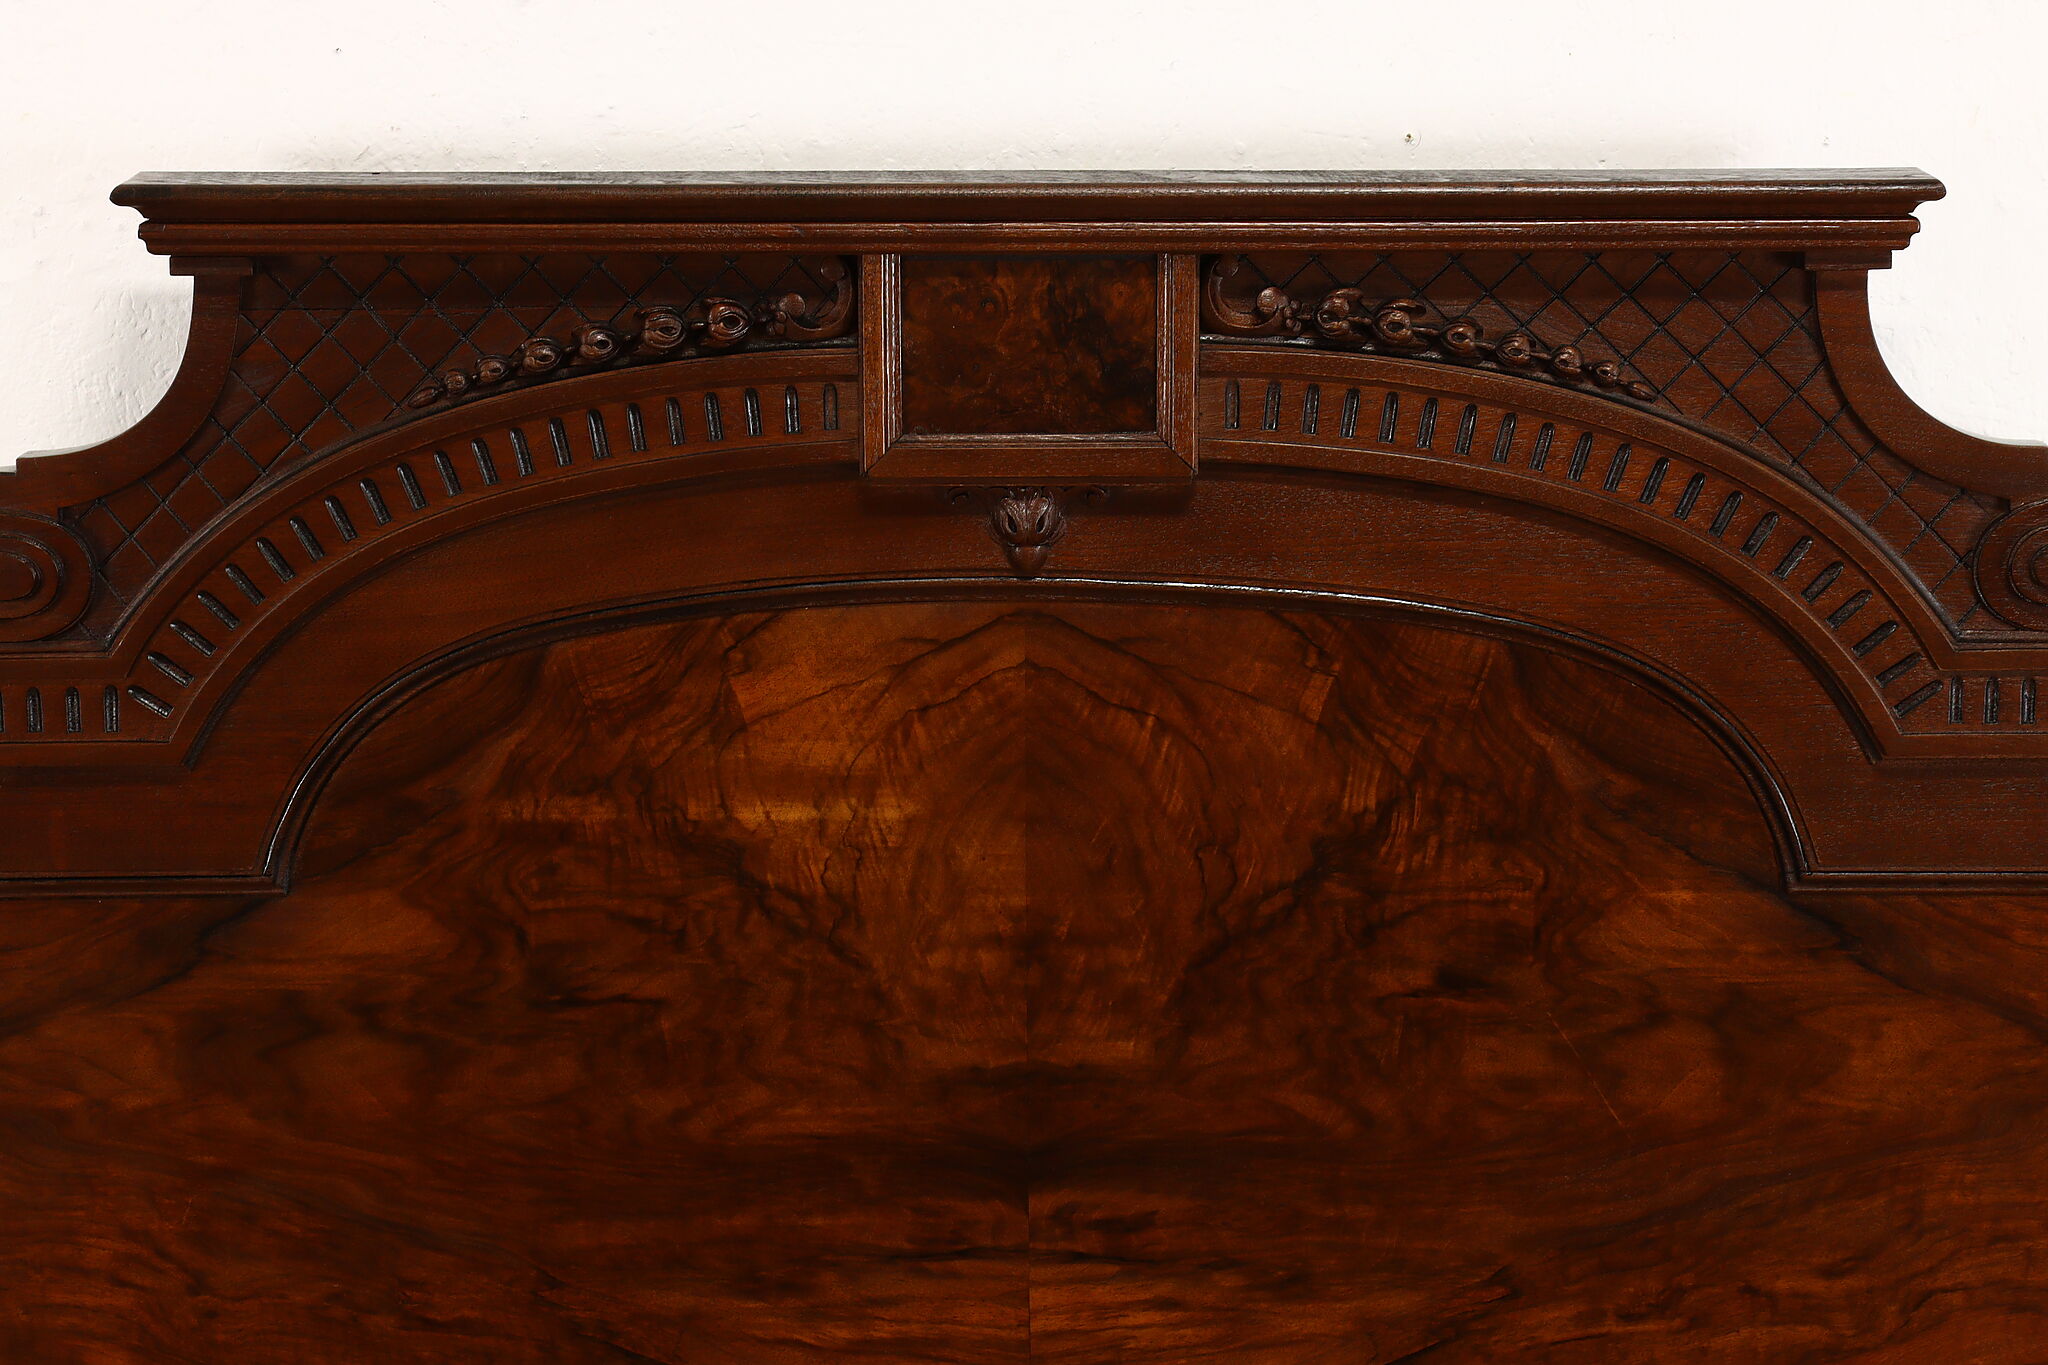 Converting an Antique Bed to a Modern Queen or King Size – Harp Gallery  Antique Furniture Blog